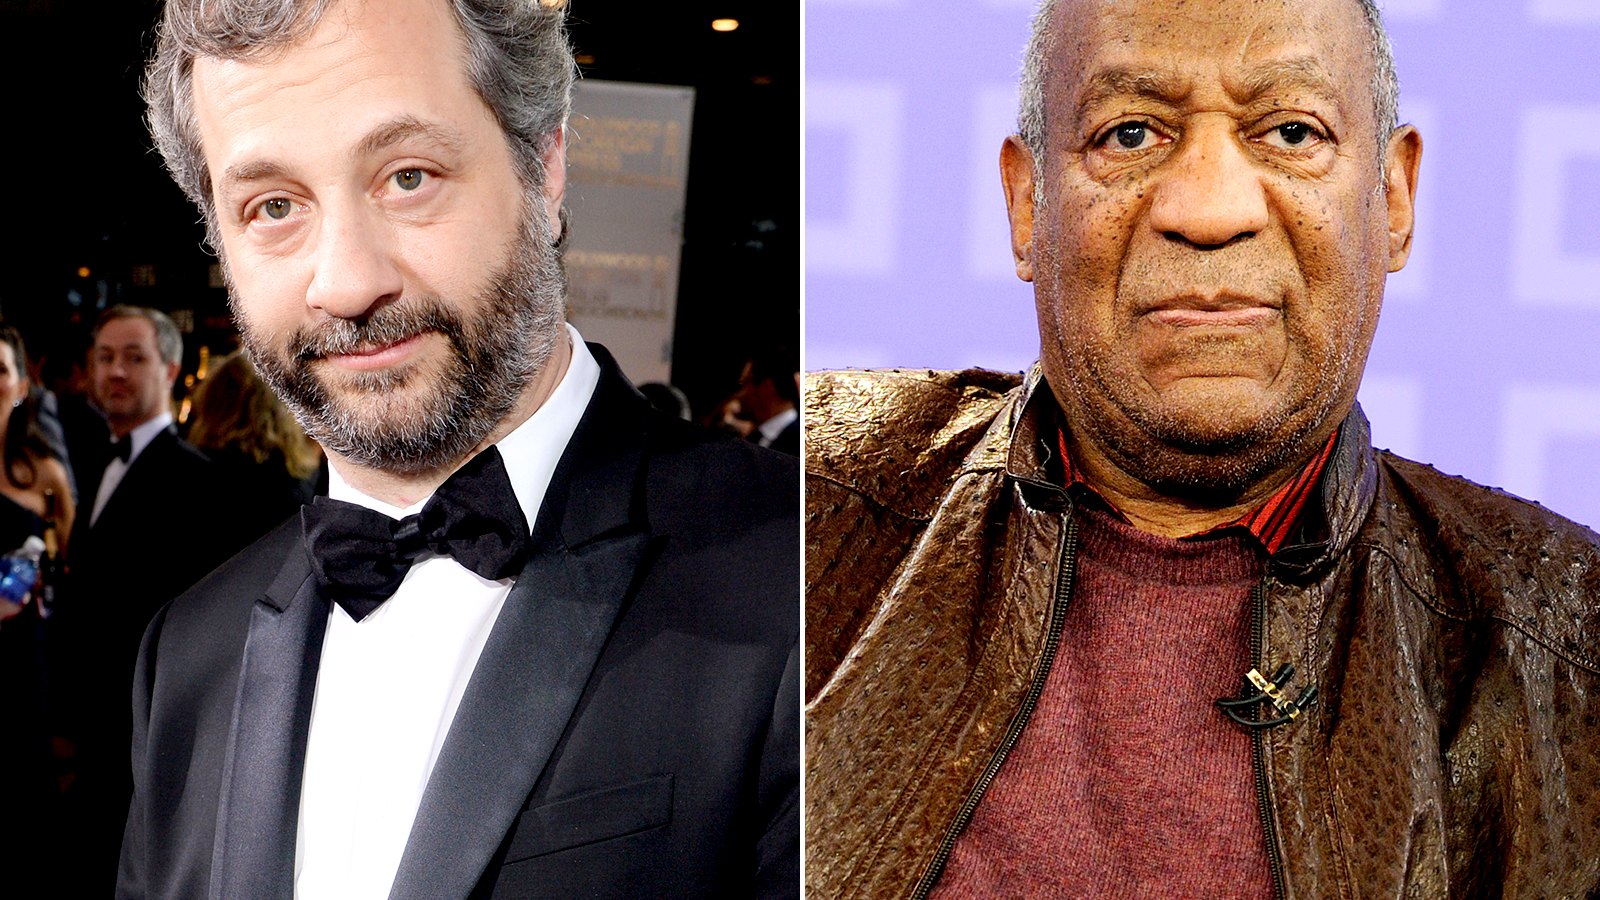 Judd Apatow and Bill Cosby